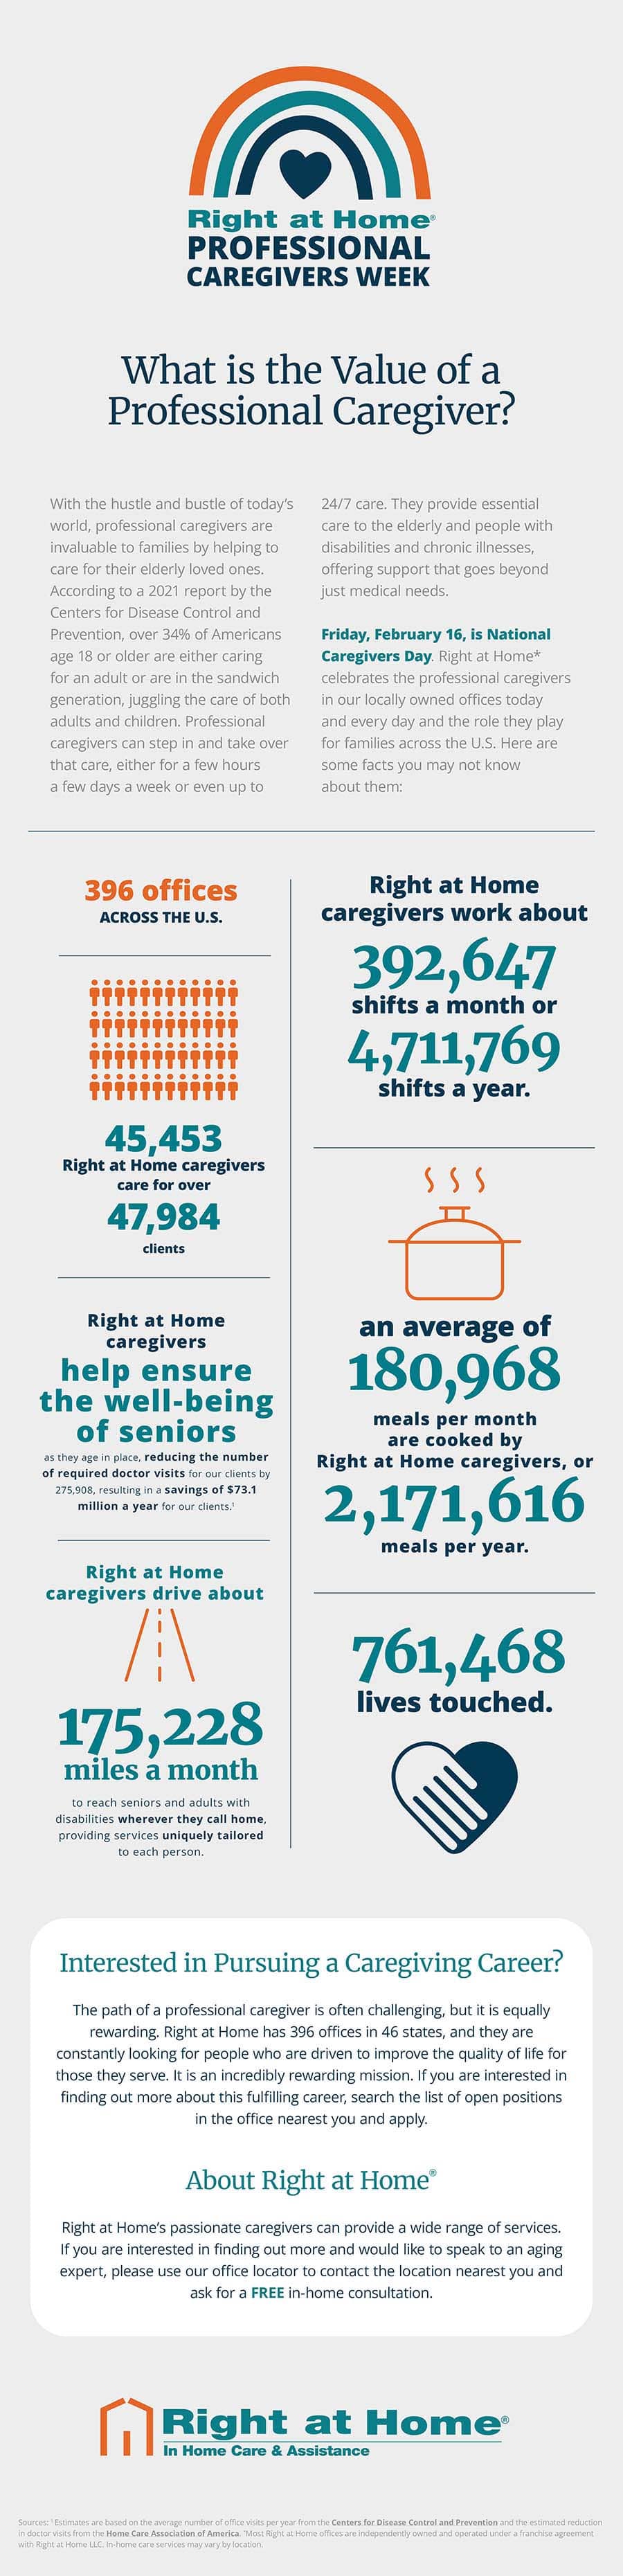 What is the value of a professional caregiver infographic